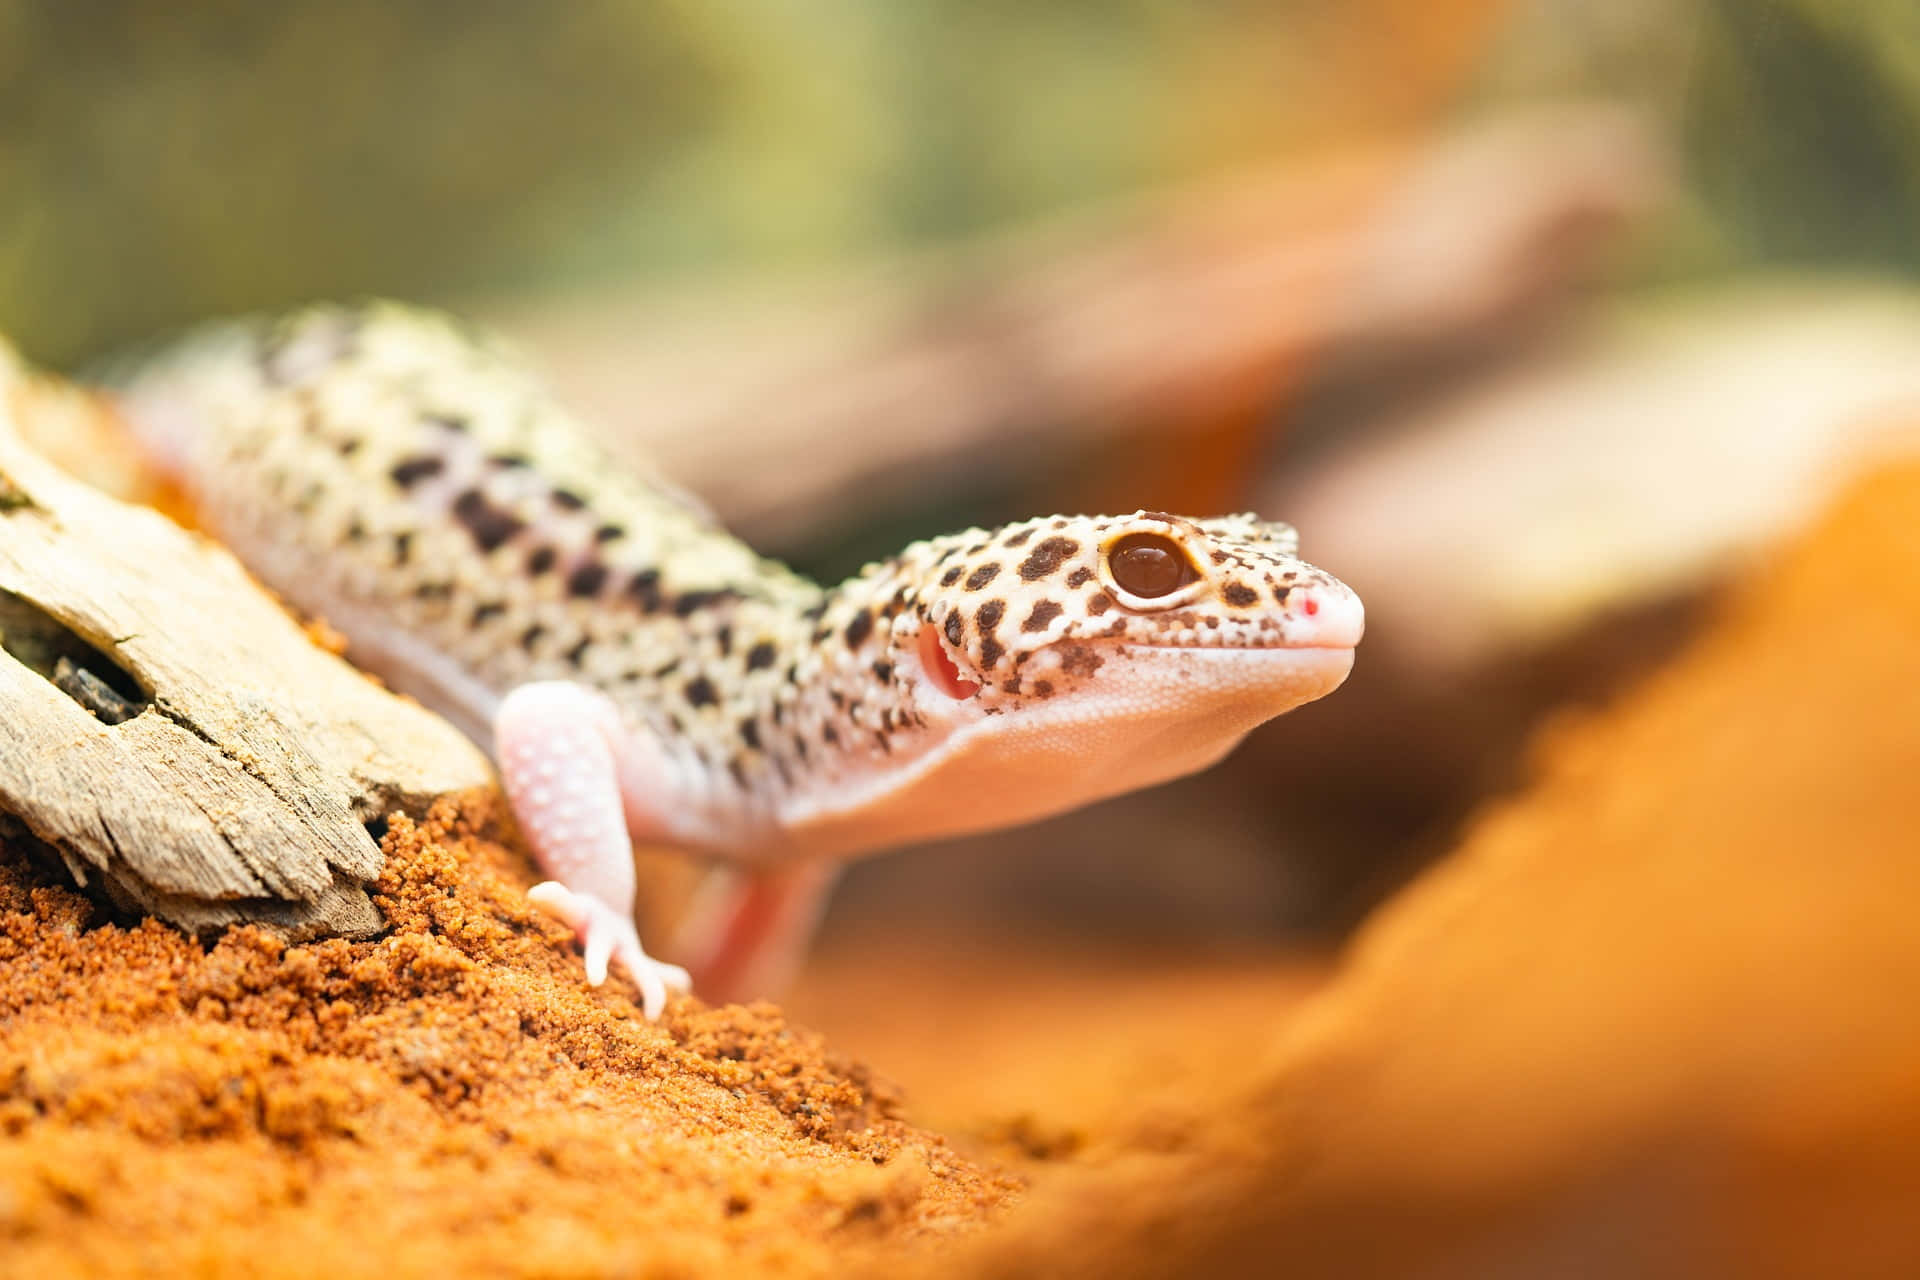 A Close-Up View of a Gecko